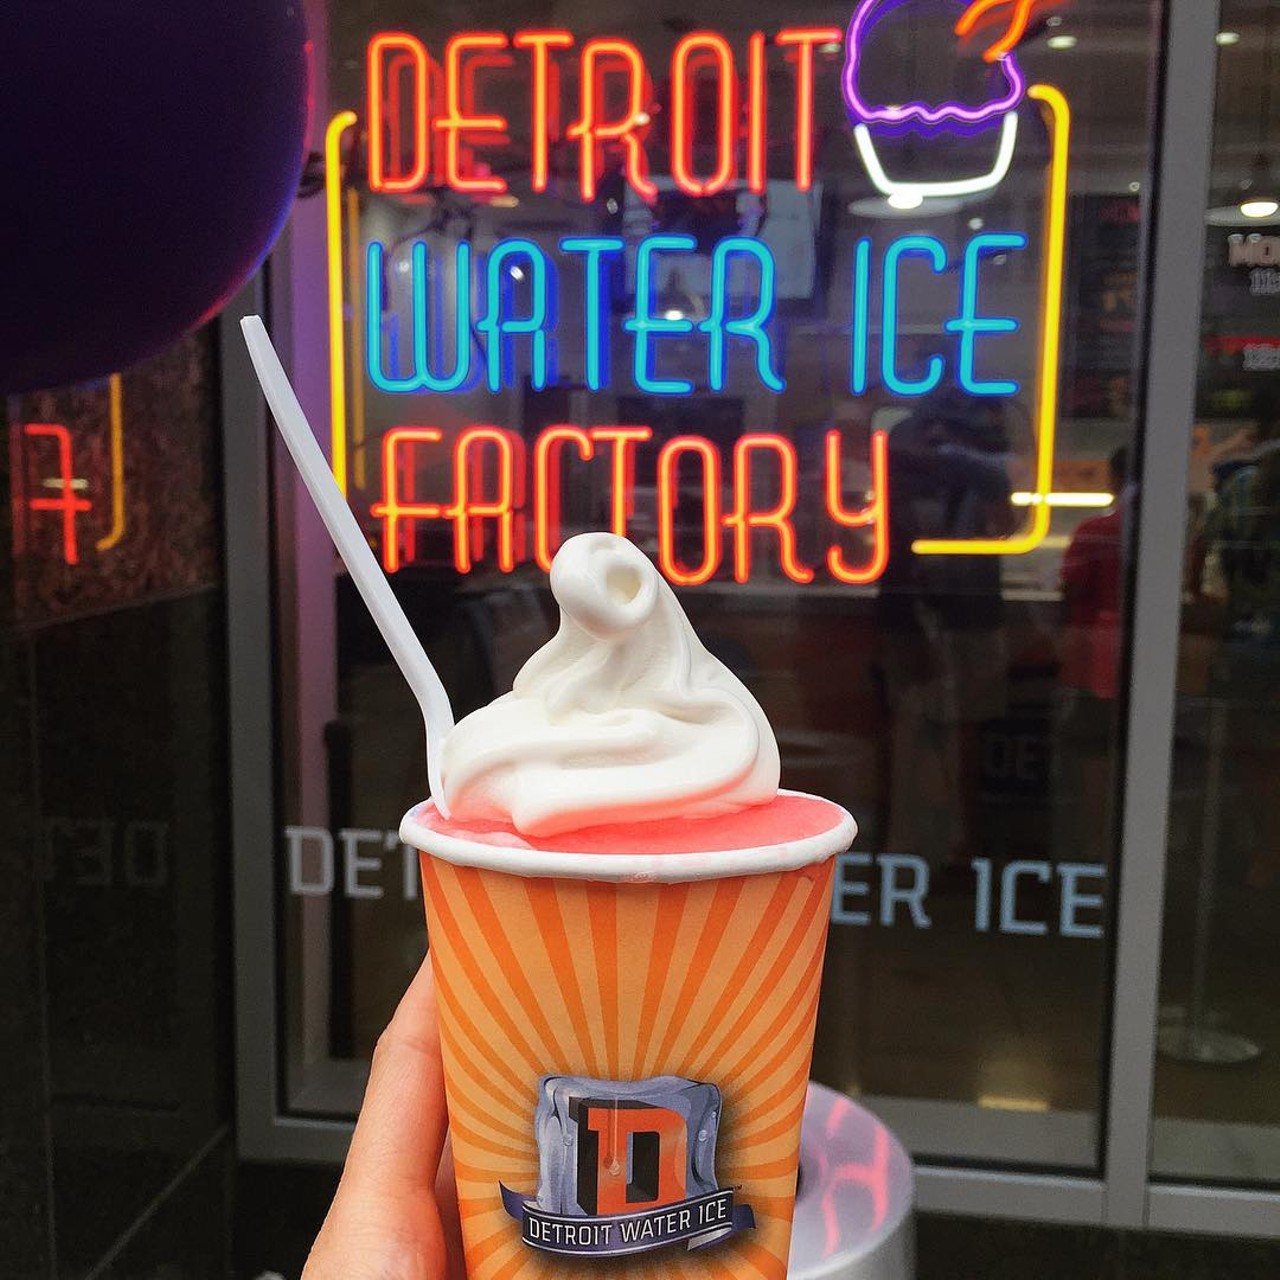 Detroit Water Ice Factory, 1014 Woodward Ave.
Your honey bunny works downtown and is always hinting that s/he hasn't yet tried that Philly-inspired water ice treat. Surprise your lover with a drive downtown, where you can stroll around Campus Martius, maybe rent bikes on the Riverfront, and then cool down with a delicious water ice-style slushie.
Photo via Instagram user @hajikitty.